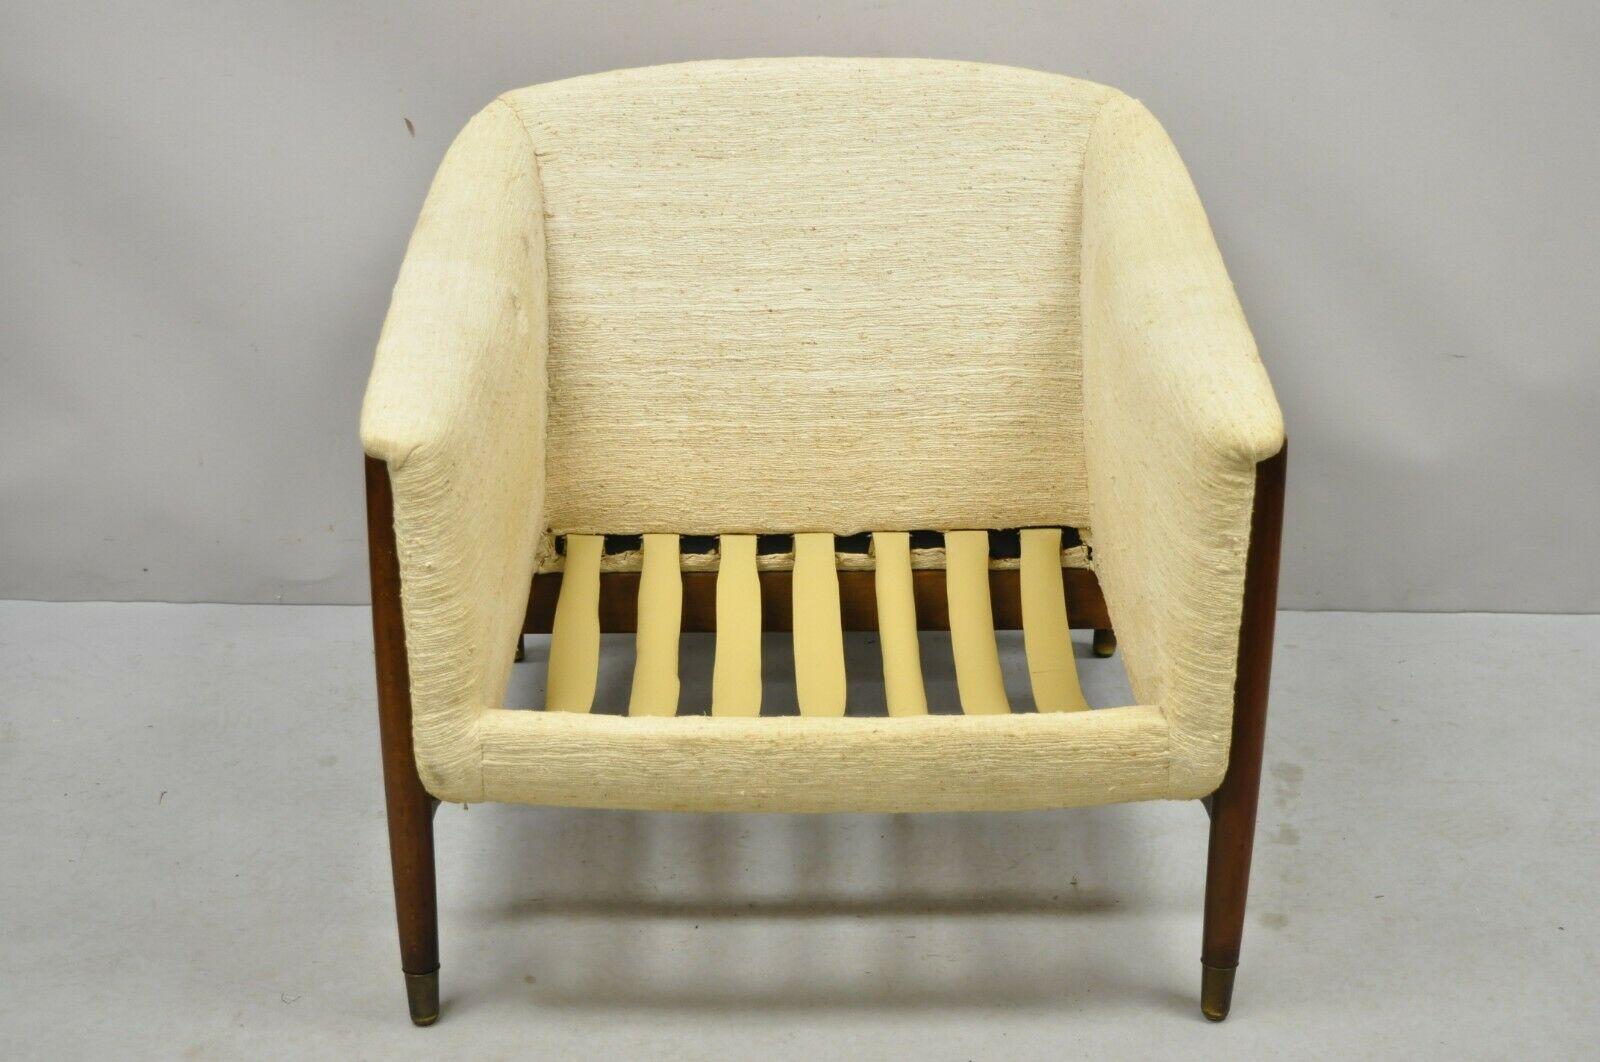 Mid-century Danish Modern sculpted walnut barrel back club lounge chair. Item features a solid wood frame, beautiful wood grain, tapered legs, very nice vintage item, sleek sculptural form. Circa mid-20th century. Measurements: 25